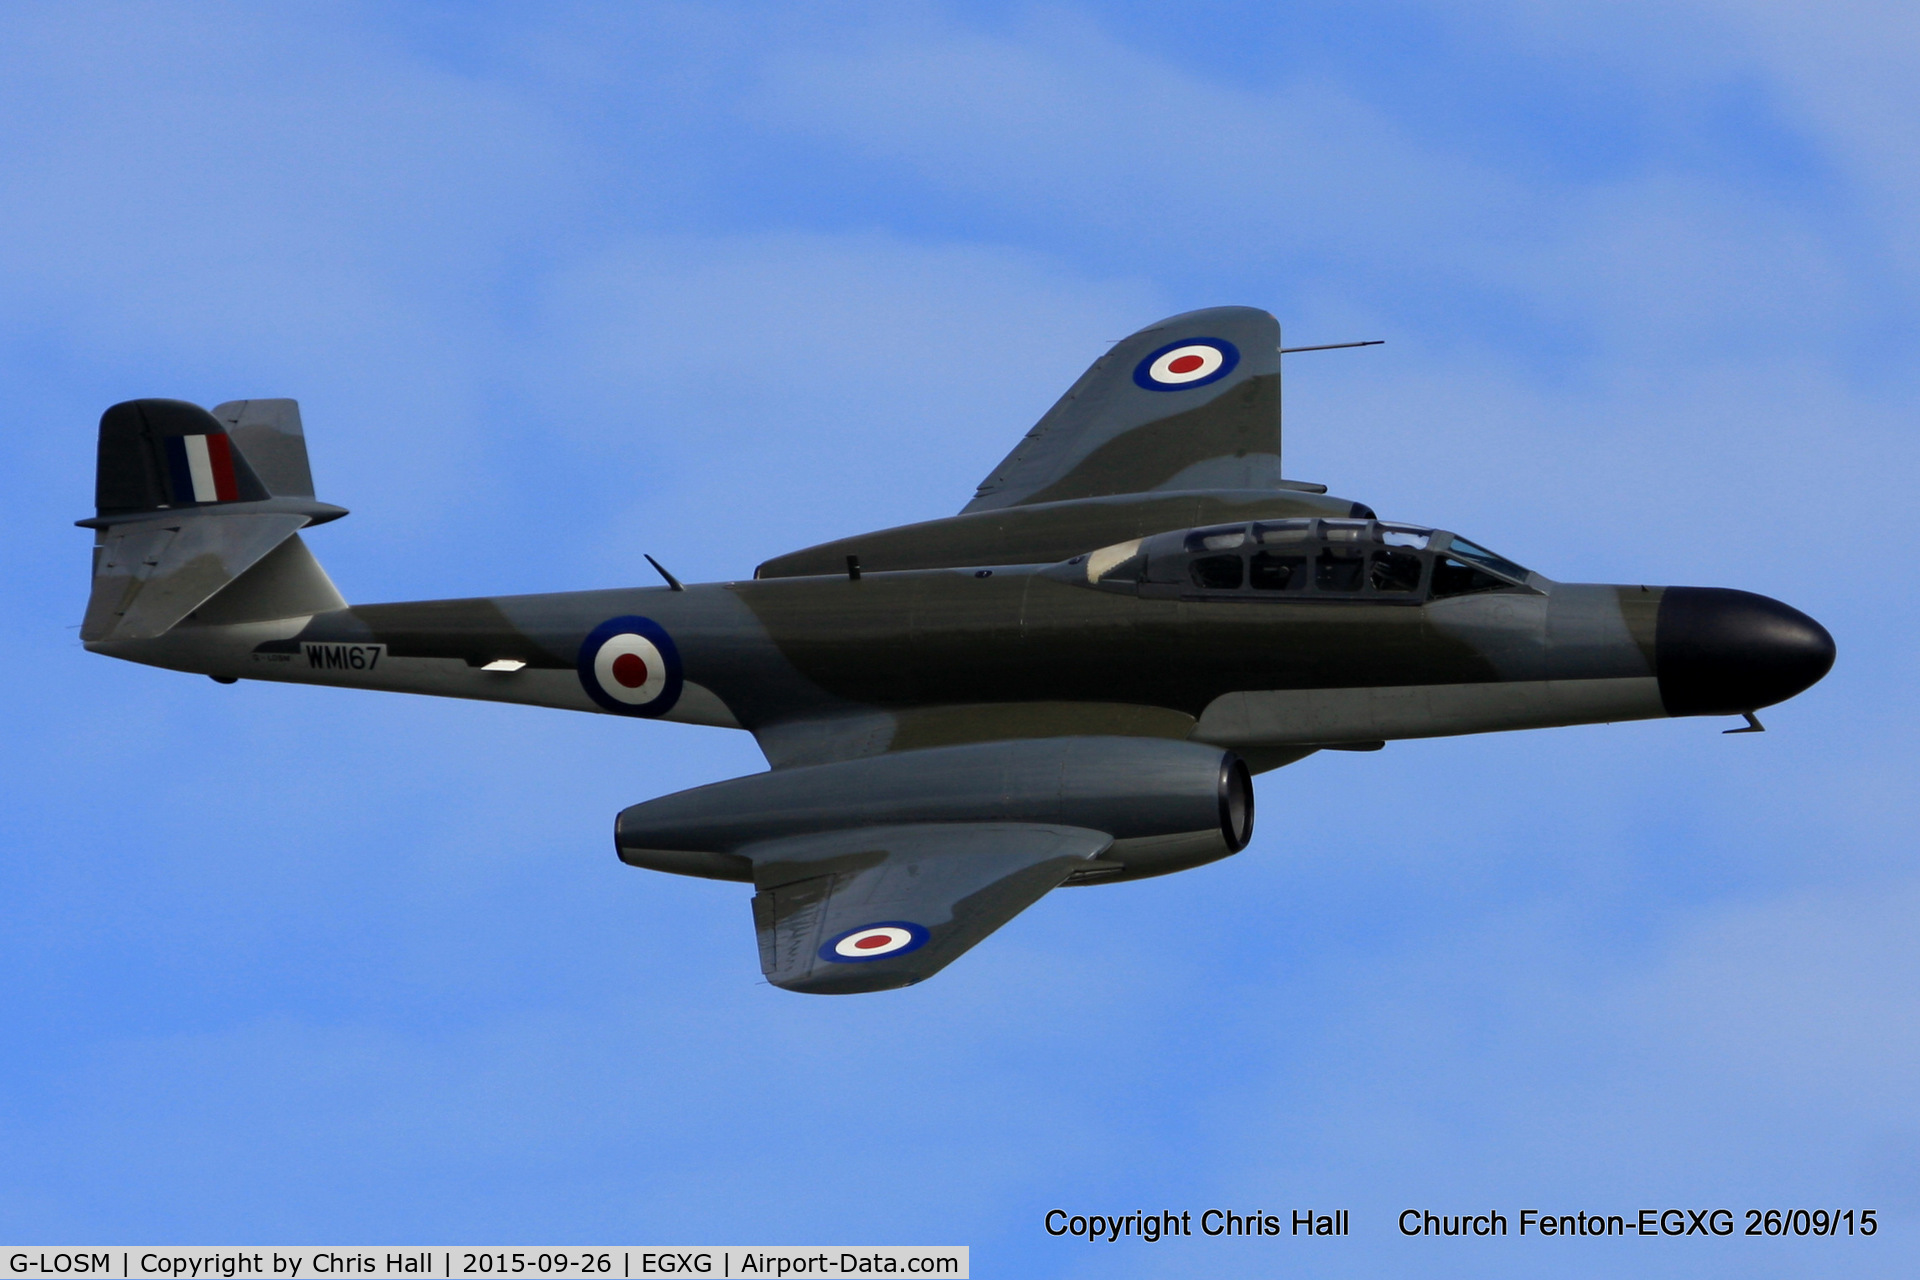 G-LOSM, 1952 Gloster Meteor NF.11 C/N S4/U/2342, at the Yorkshire Airshow